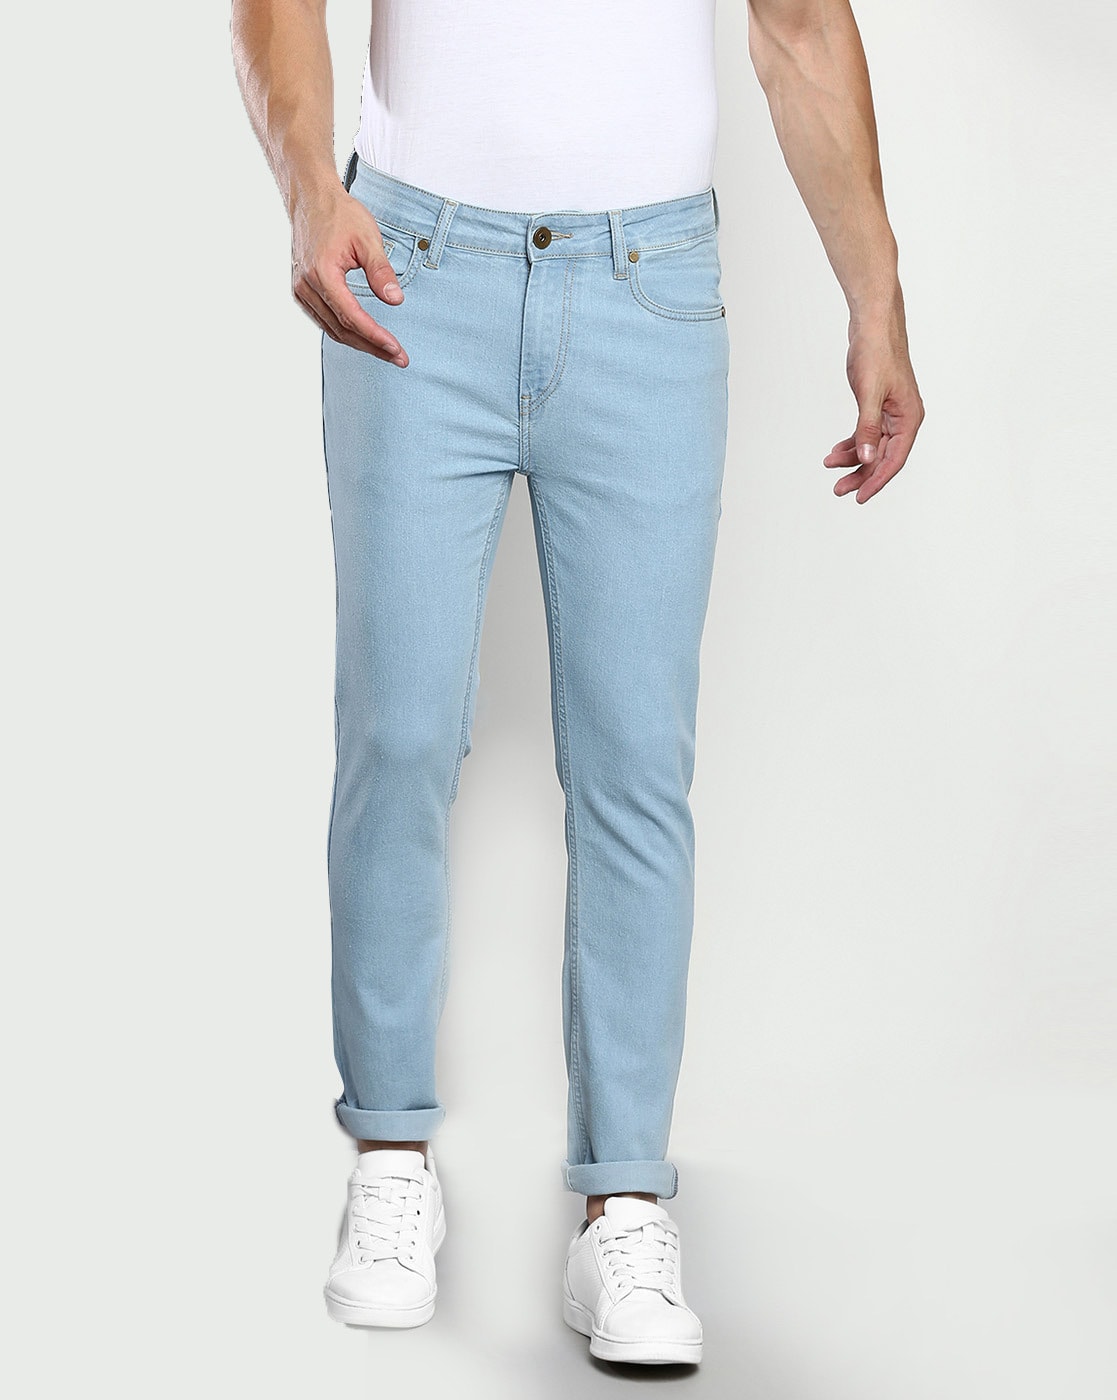 Flare For You Tall High Waisted Flared Leg Jeans in Light Blue Wash | Oh  Polly